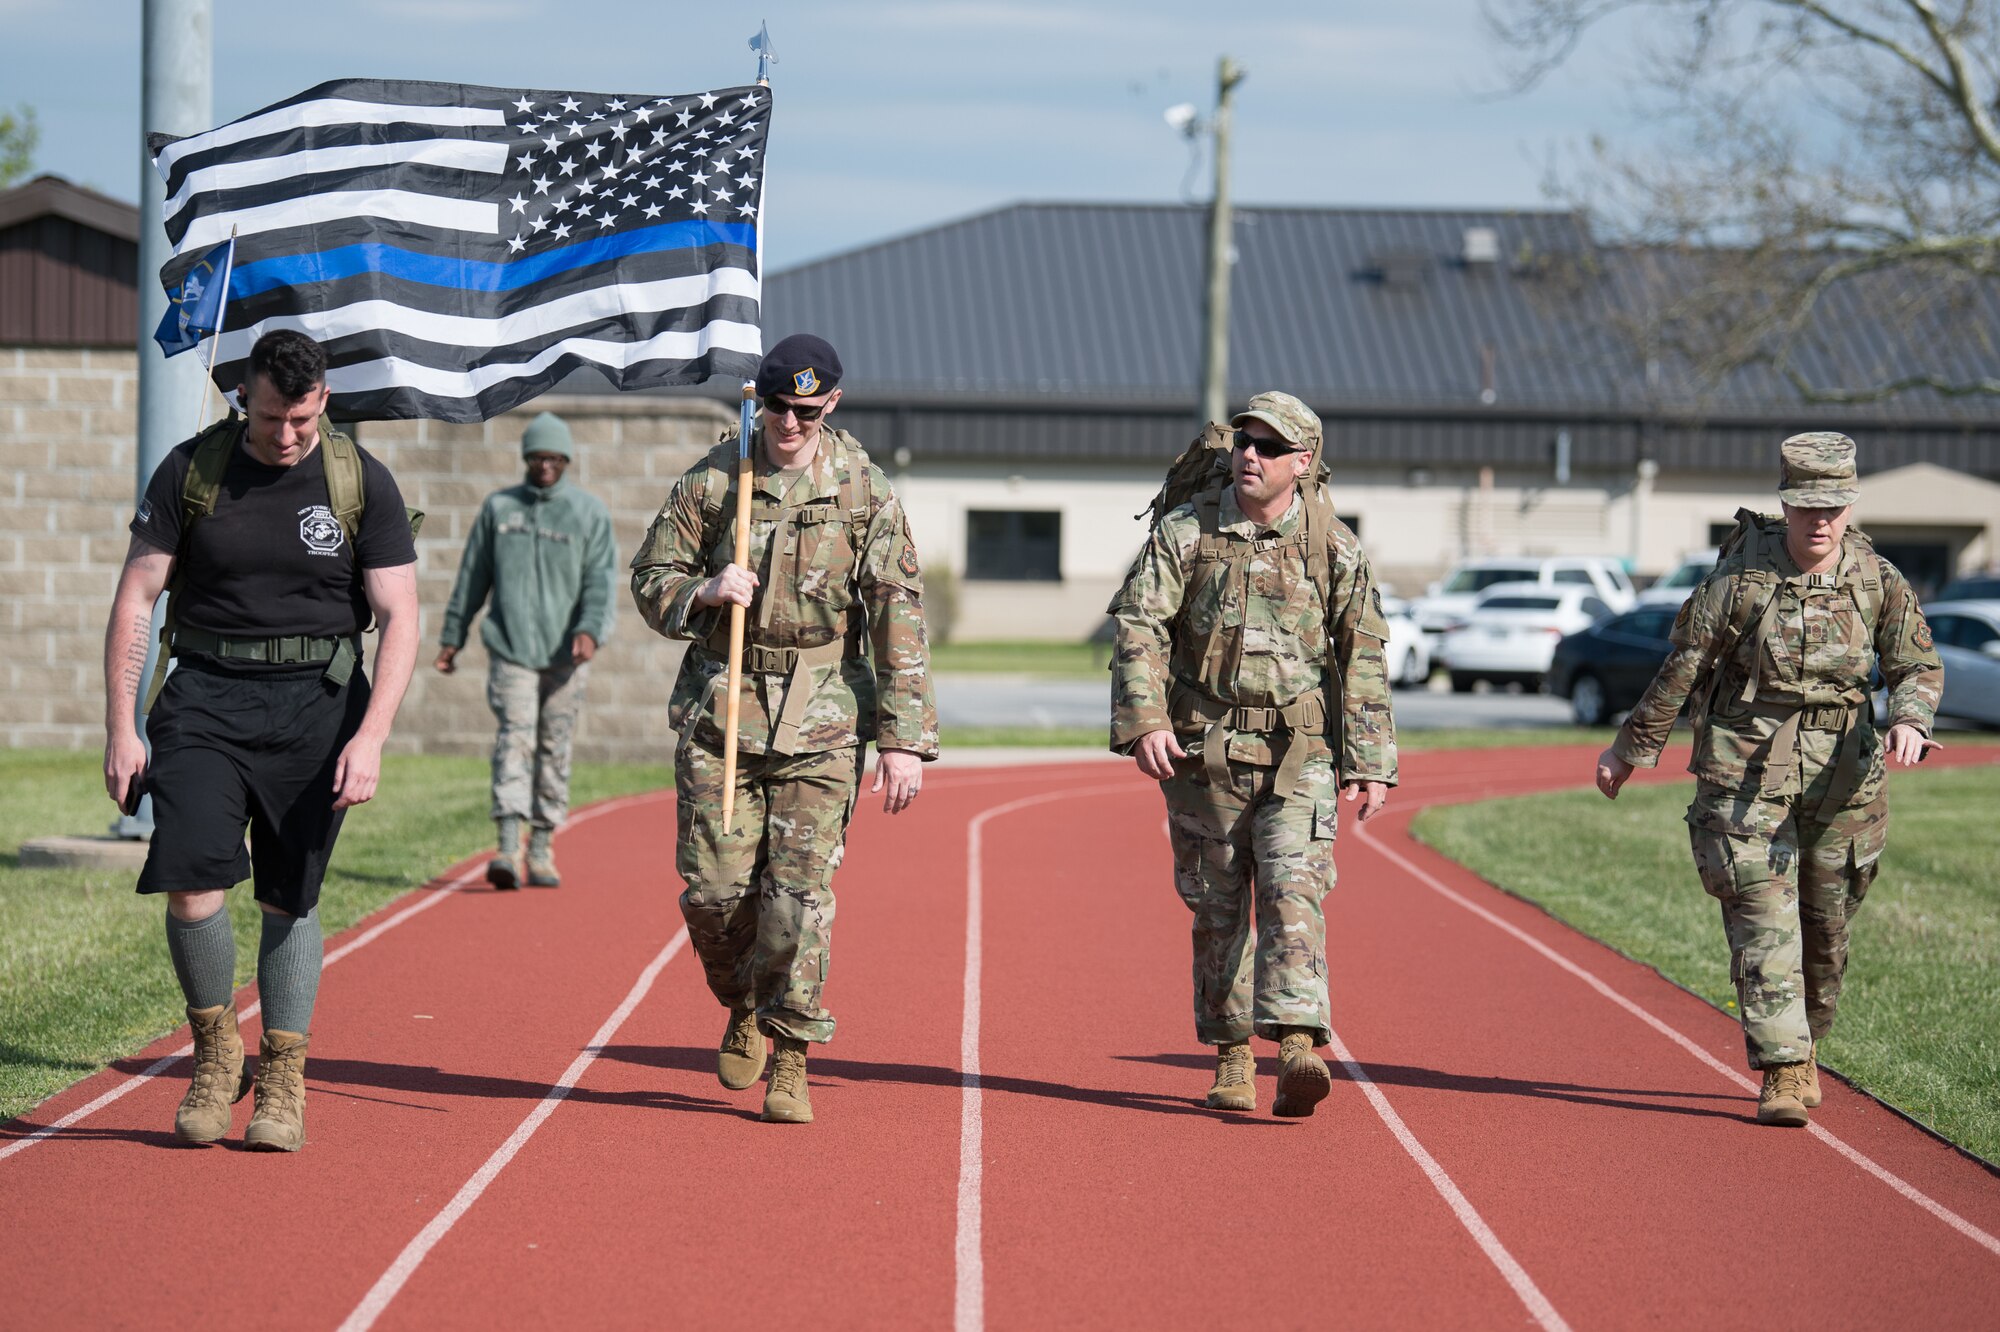 Members of Team Dover participate in the 2020 Police Week Ruck March May 14, 2020, at Dover Air Force Base, Delaware. Over 100 participants walked or ran in the 24-hour event commemorating fallen military and civilian law enforcement officers. (U.S. Air Force photo by Mauricio Campino)